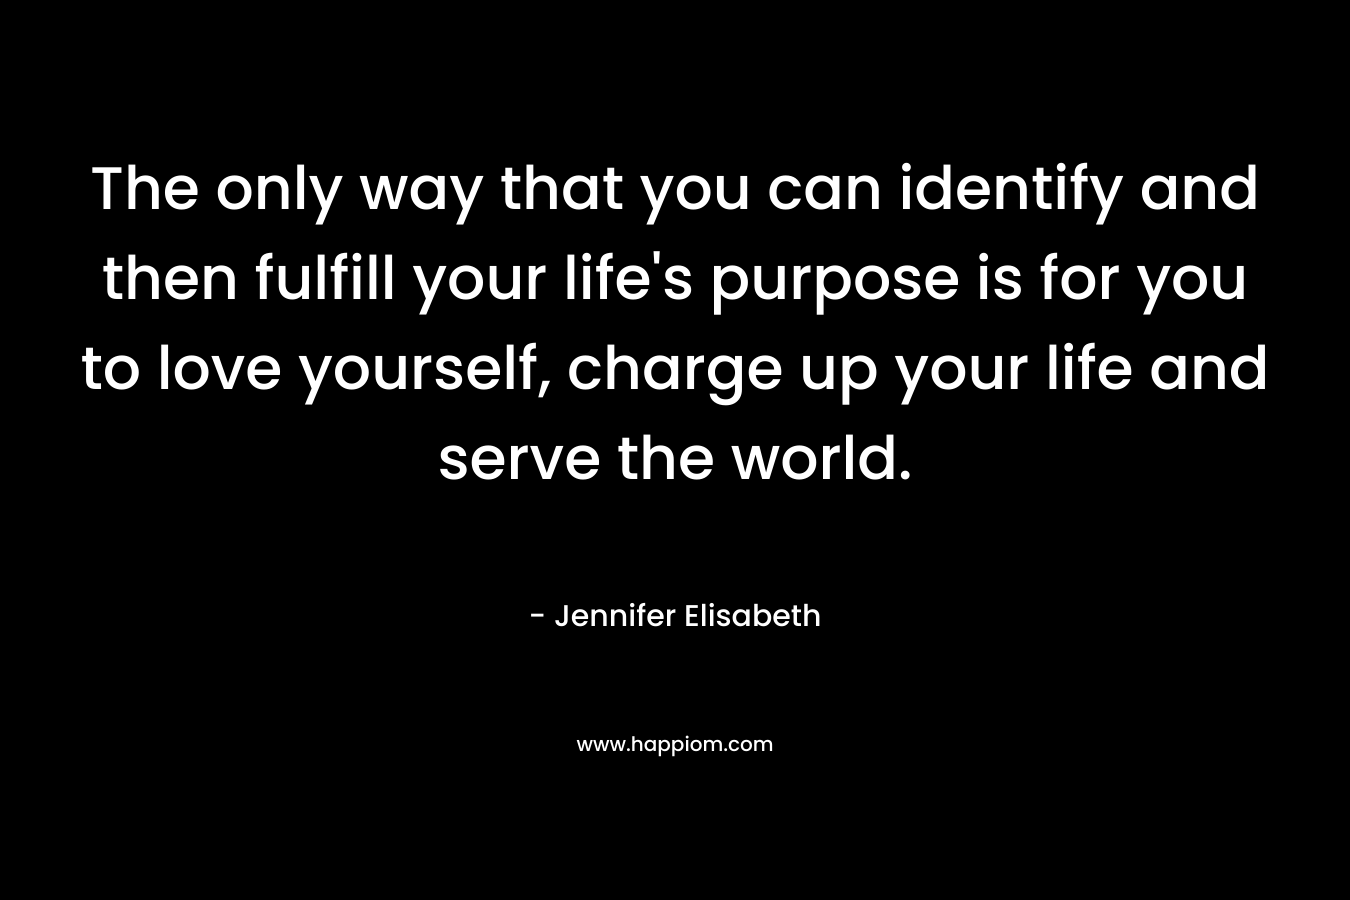 The only way that you can identify and then fulfill your life's purpose is for you to love yourself, charge up your life and serve the world.